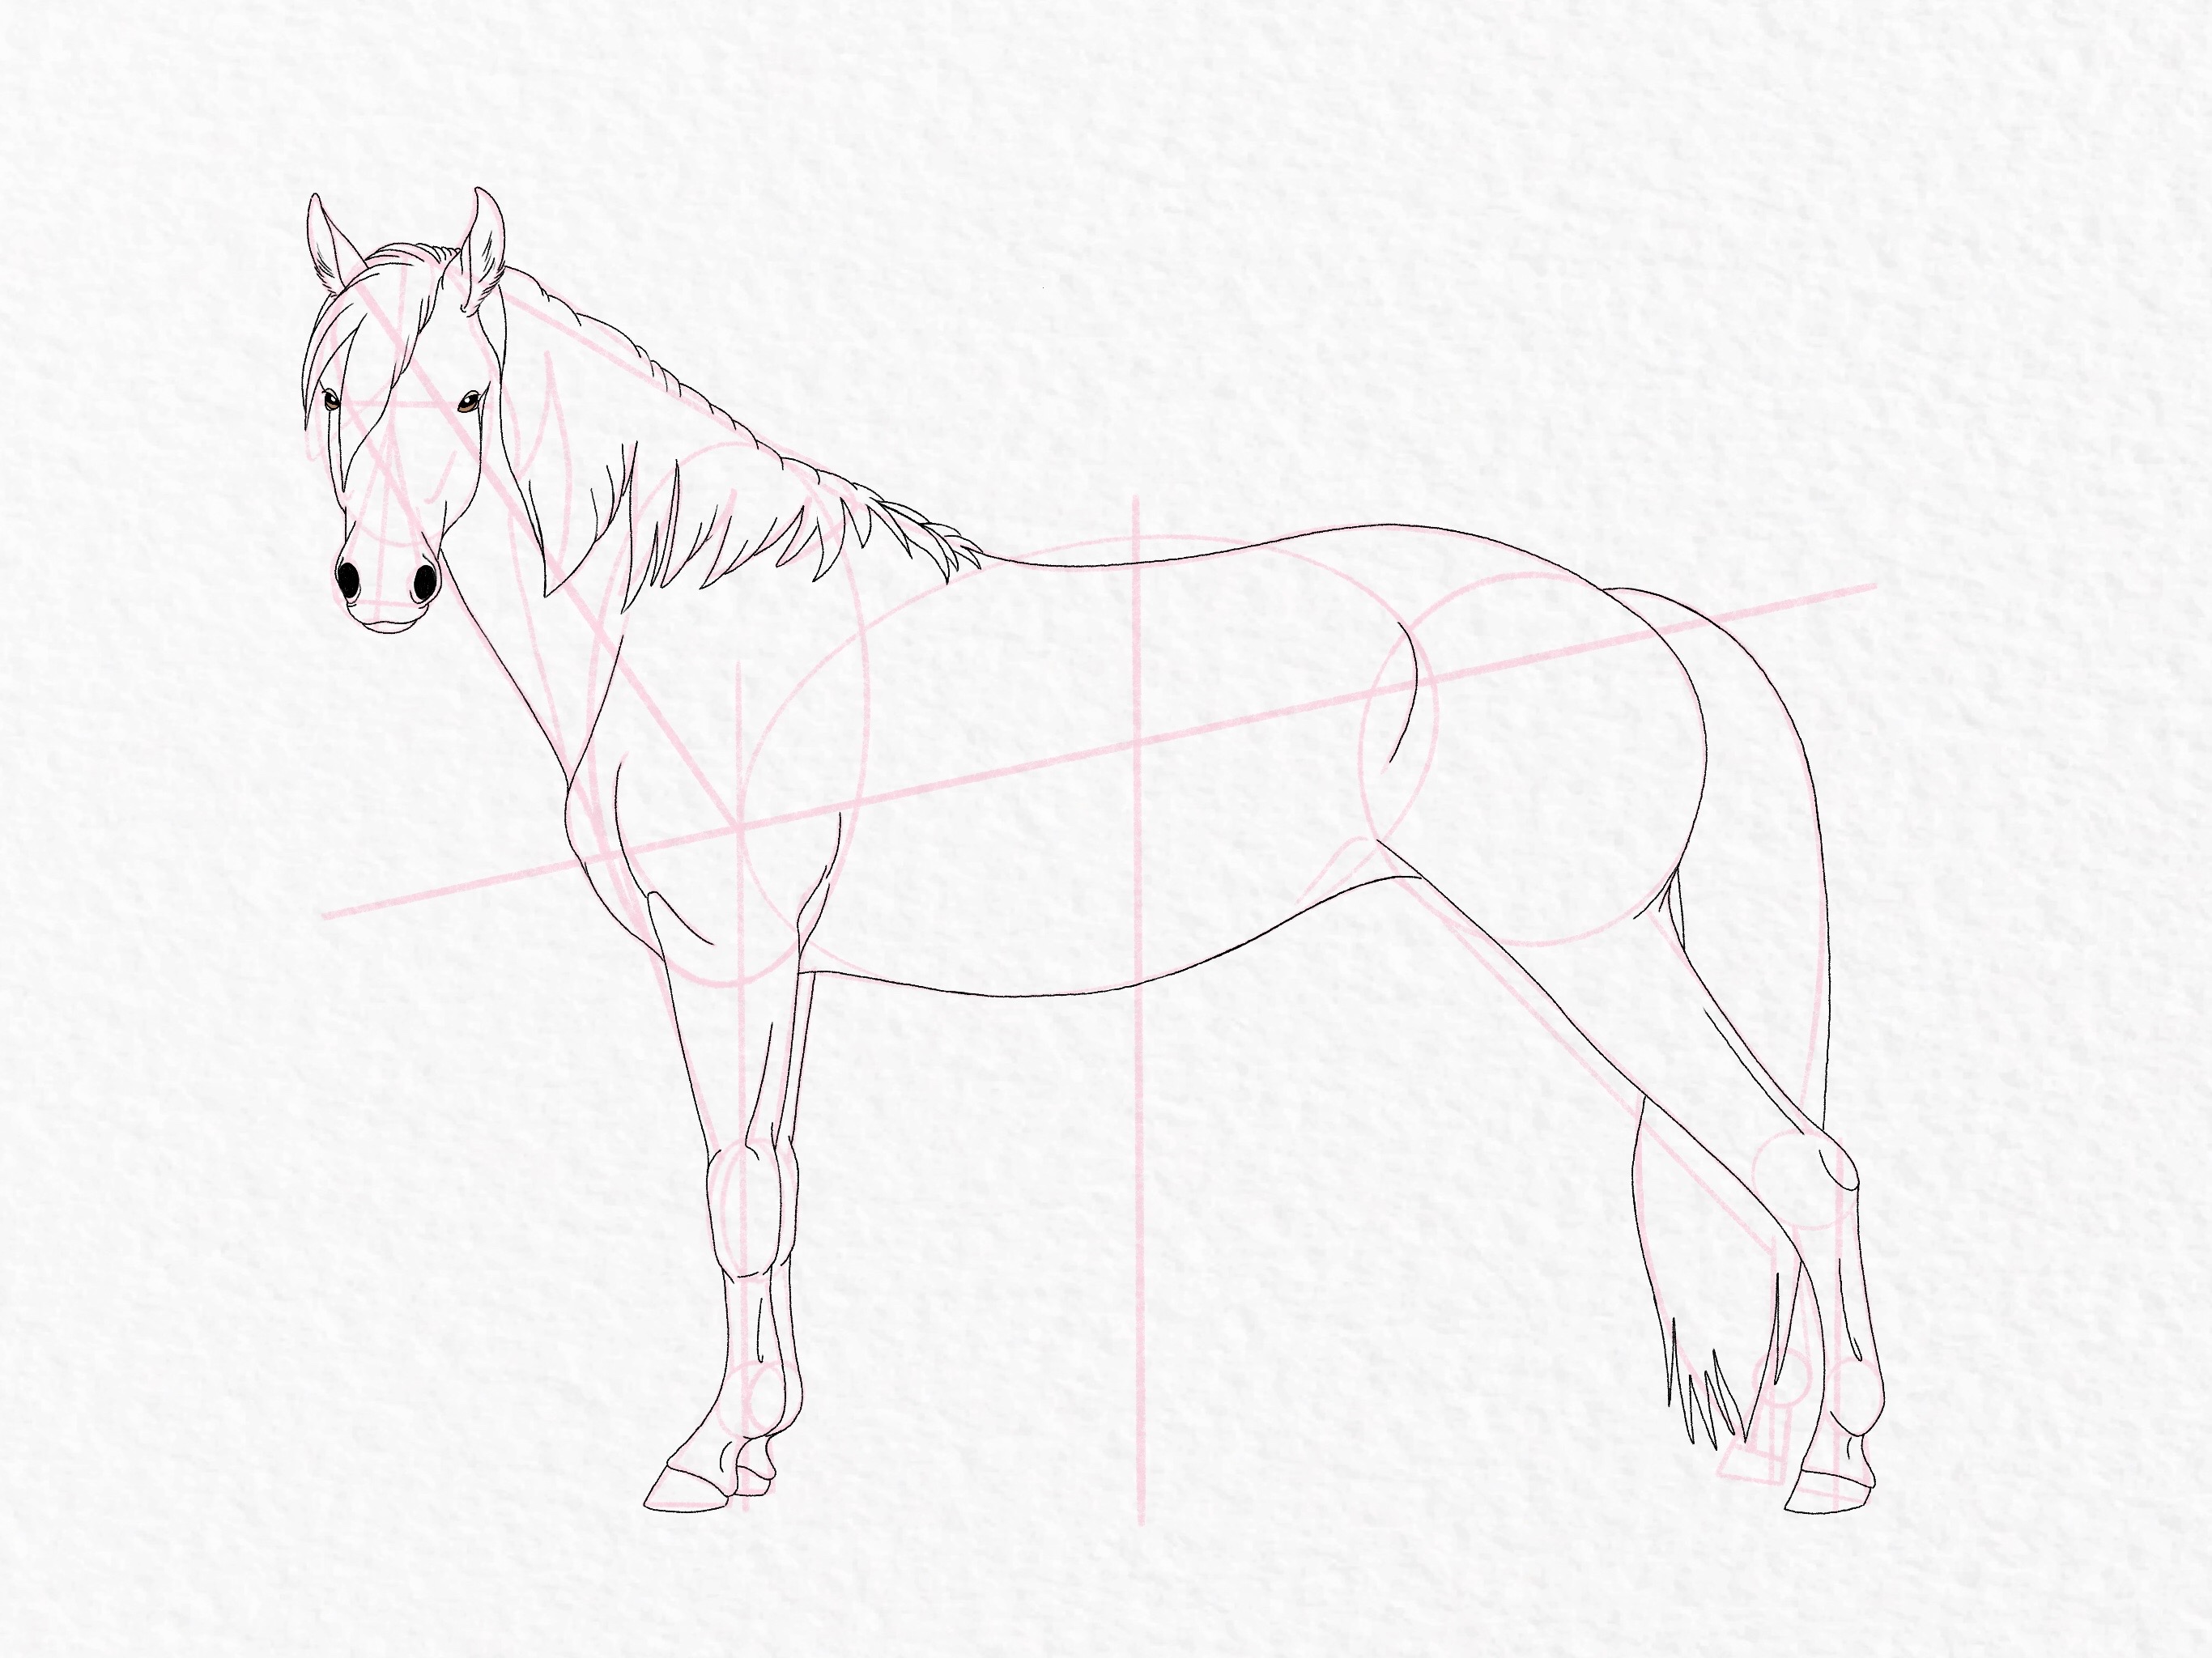 Horse Hand drawn horse illustrations set. Sketch drawing horses in  different poses.:: tasmeemME.com